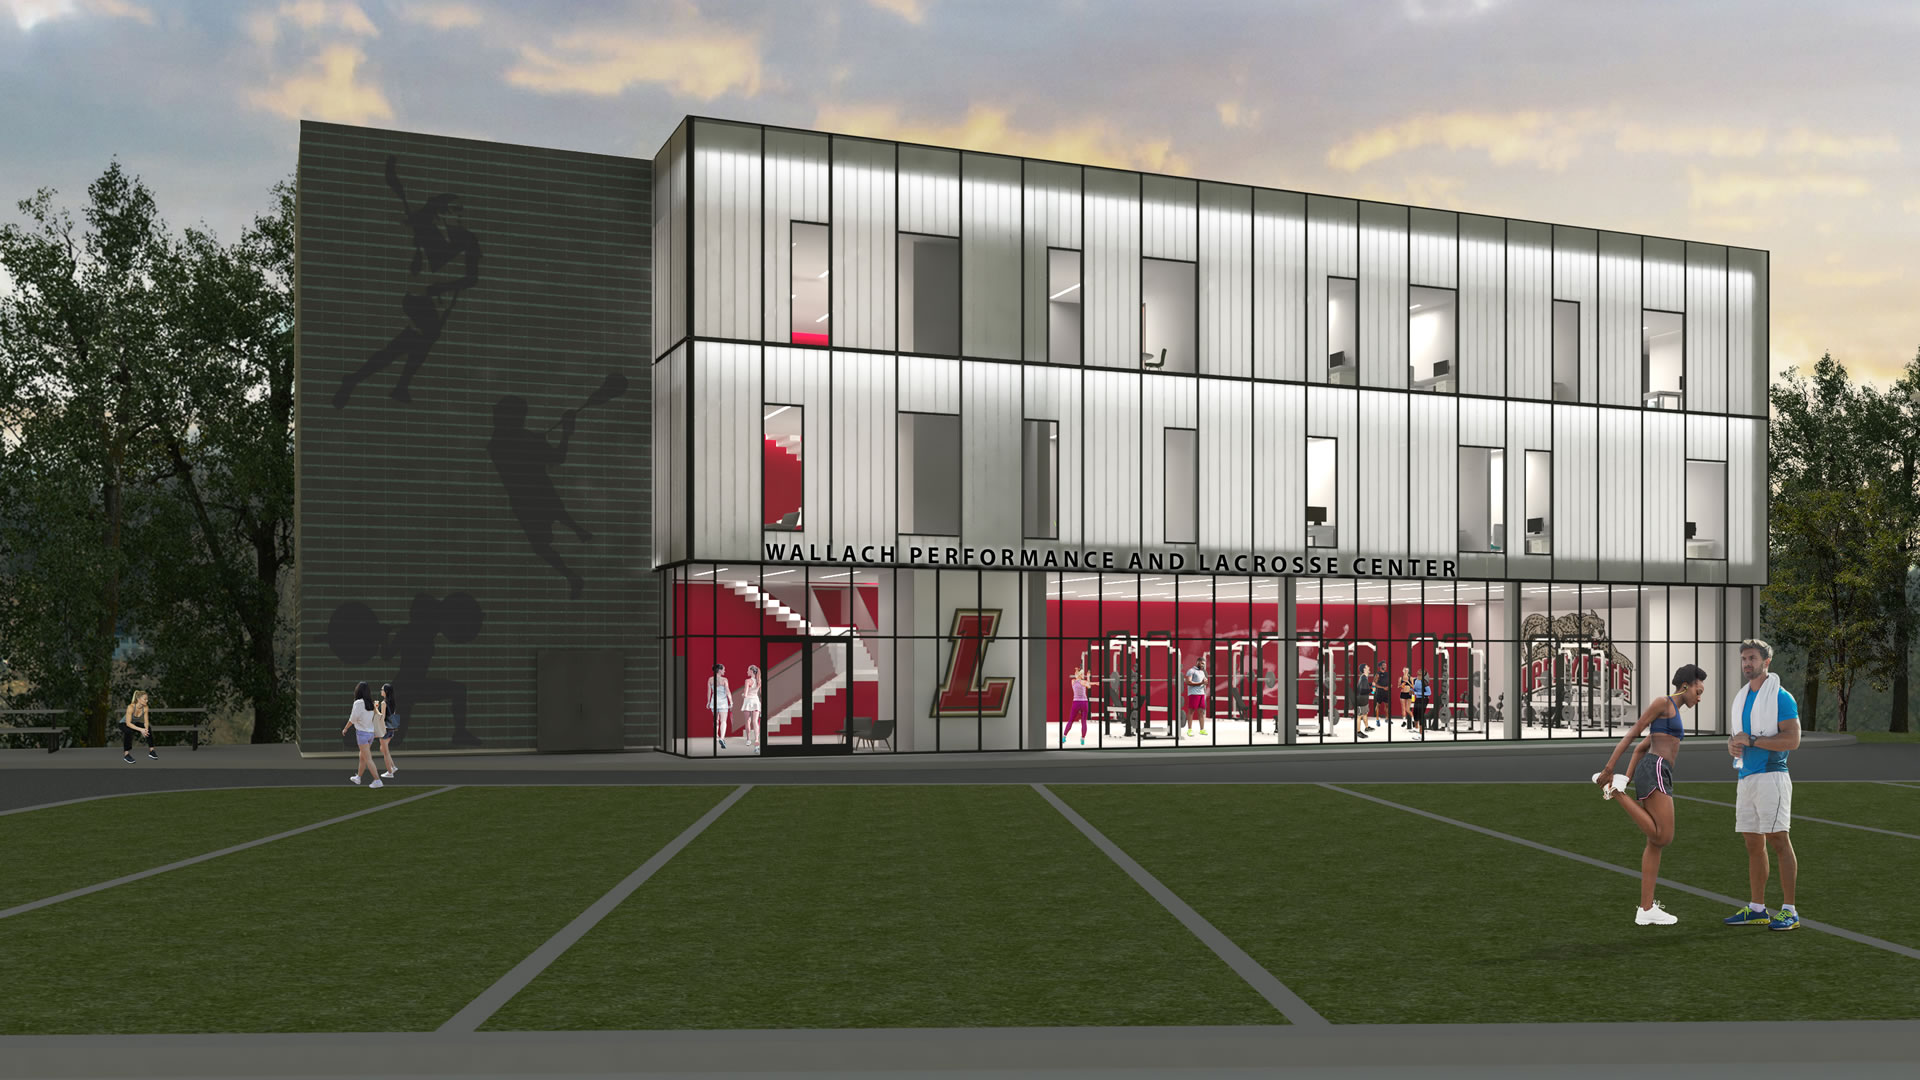 Wallach Sports Performance and Lacrosse Center at Lafayette College